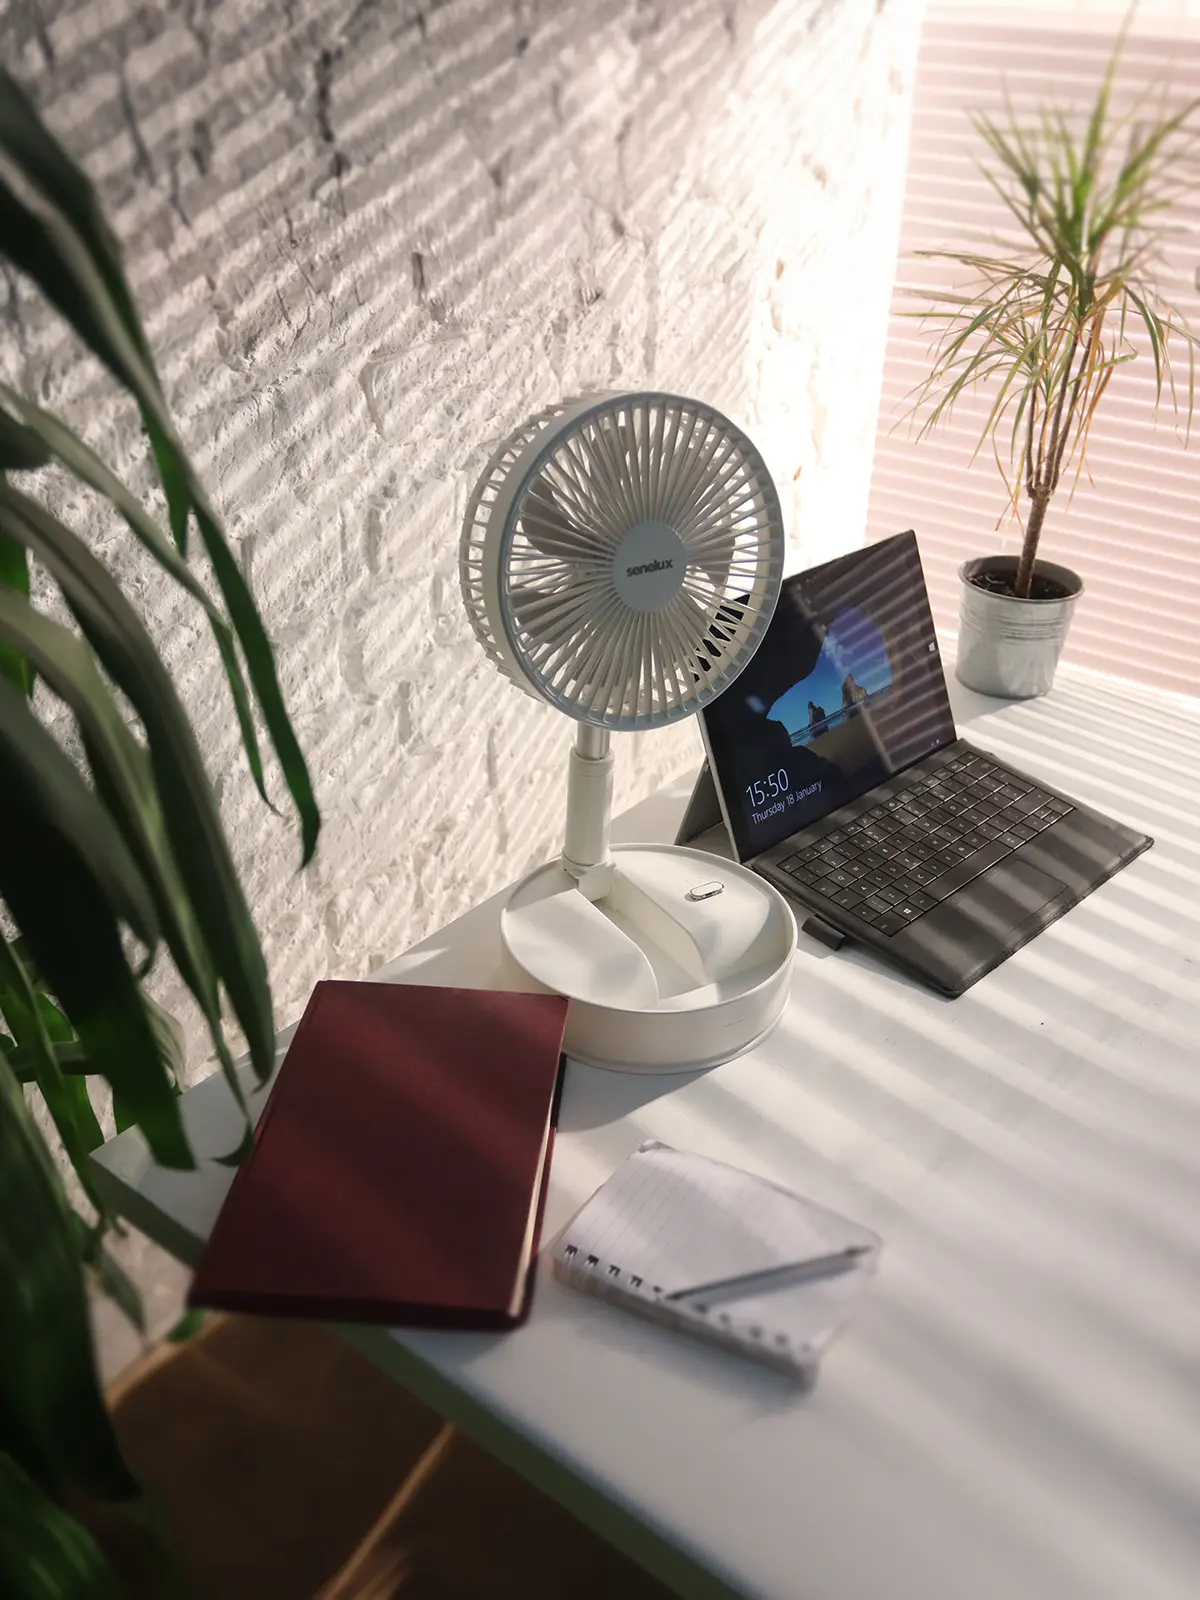 A photo of the Senelux rechargeable cooling fan sitting on a desk in a brightly lit, warm office